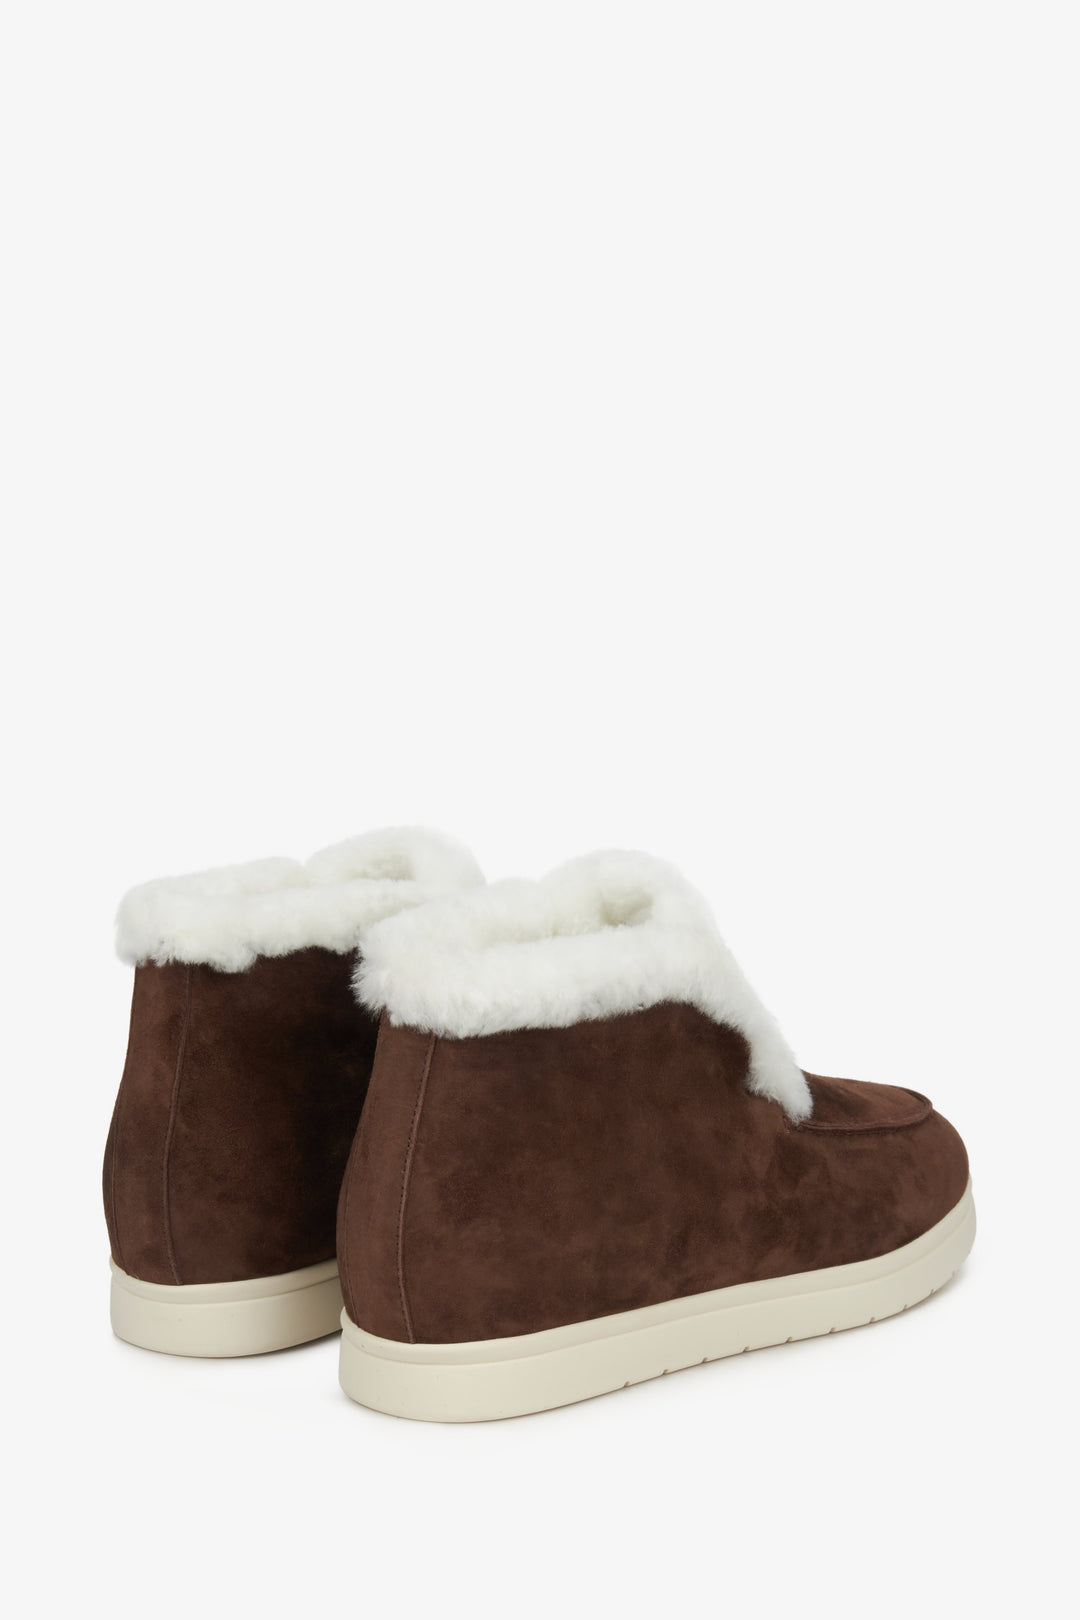 Elevated women's winter moccasins in brown suede with natural fur - close-up on the back of the shoe.